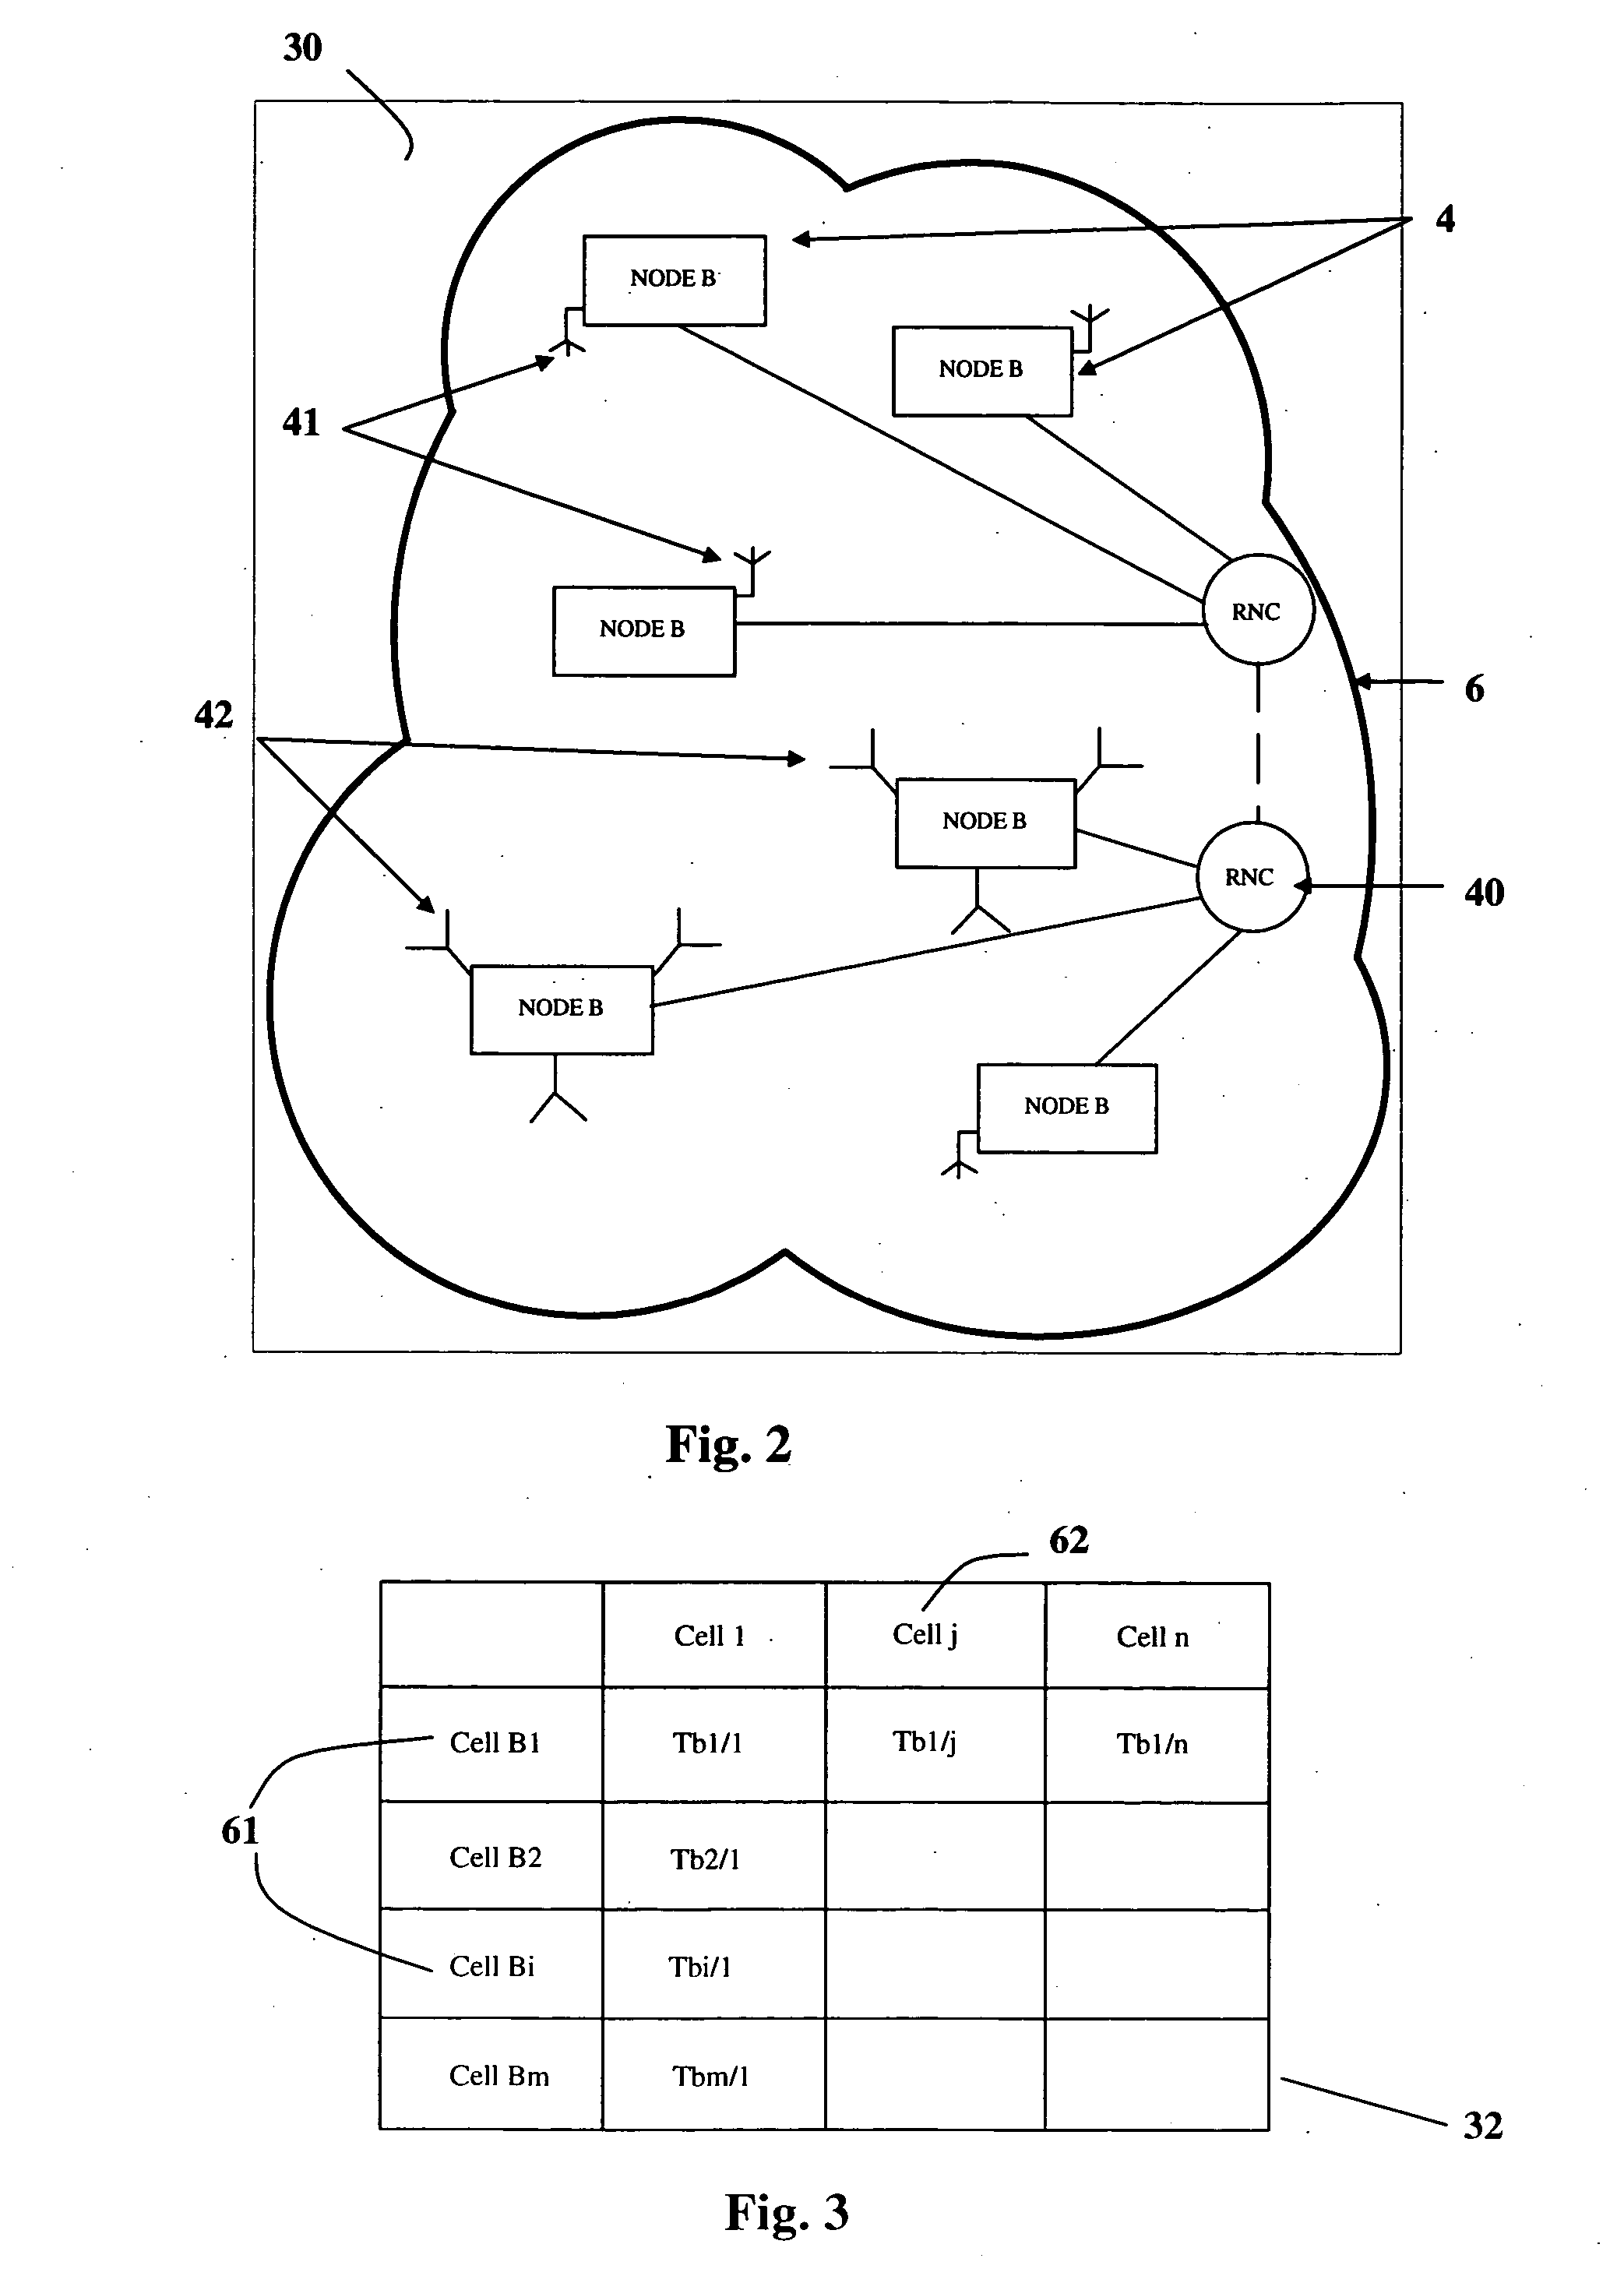 Method of calculating and displaying mutual interference in the down direction in a cellular radiotelephone network with a W-CDMA type access